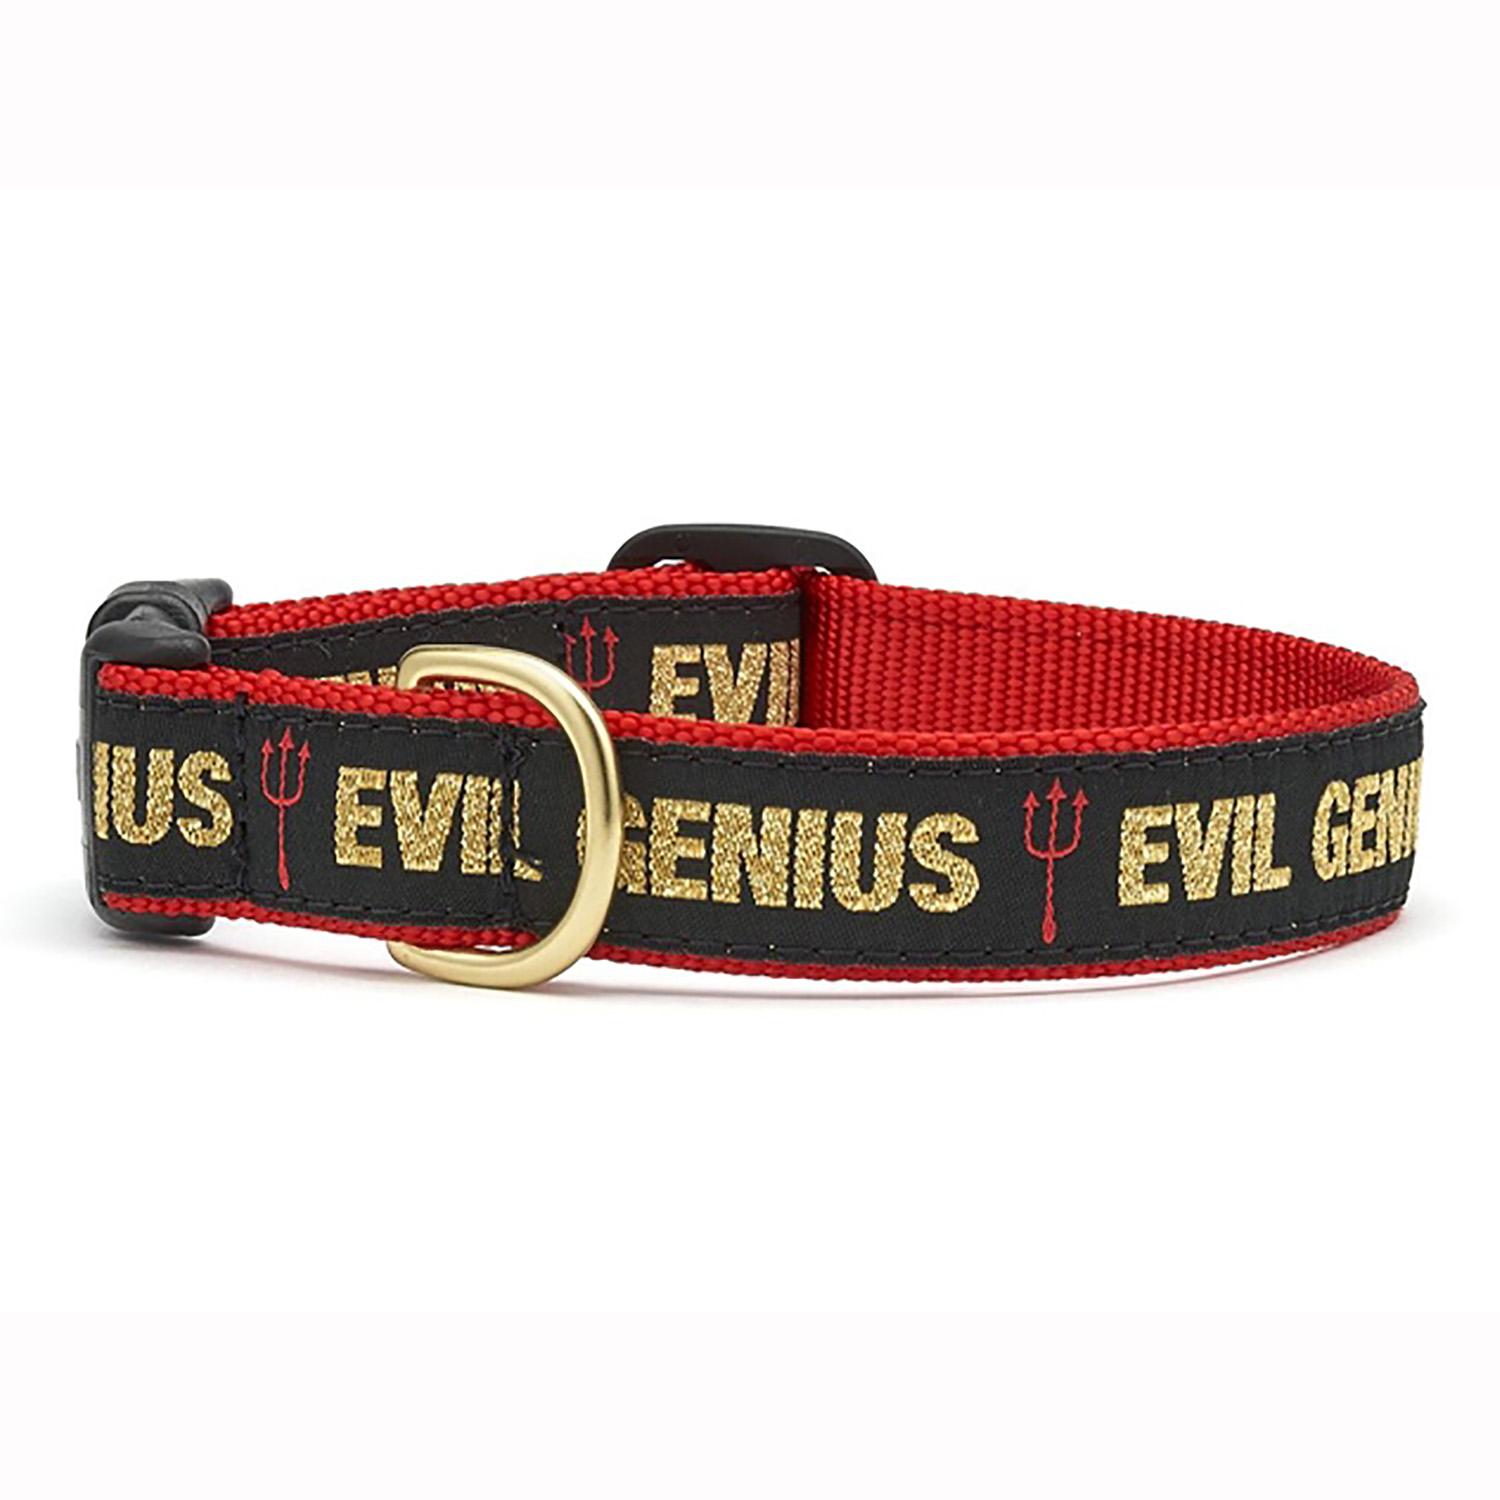 Evil Genius Dog Collar by Up Country